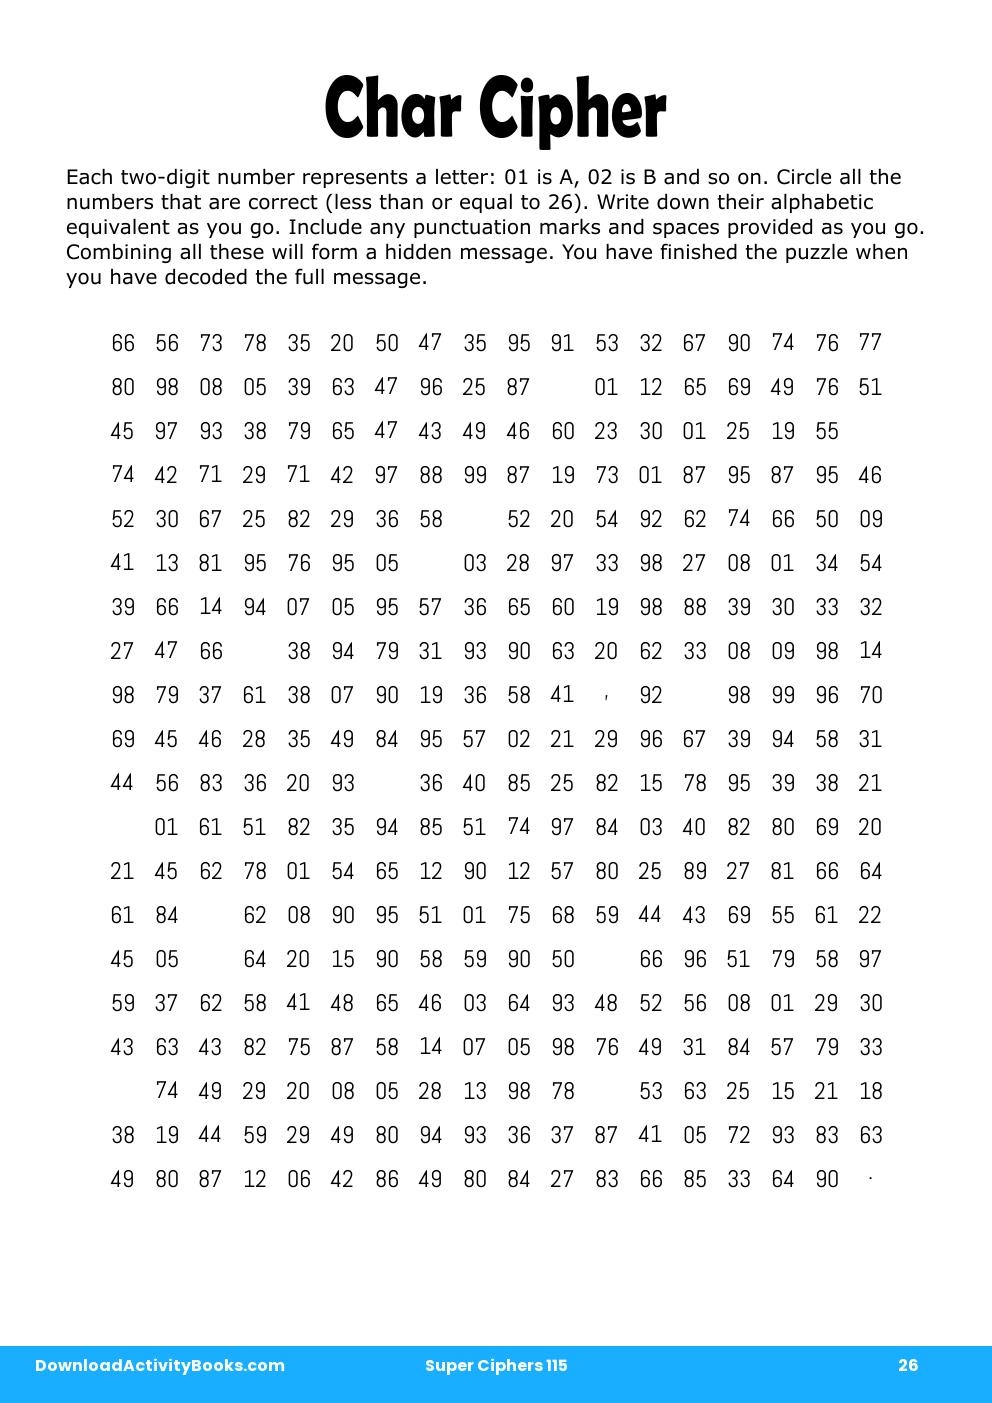 Char Cipher in Super Ciphers 115